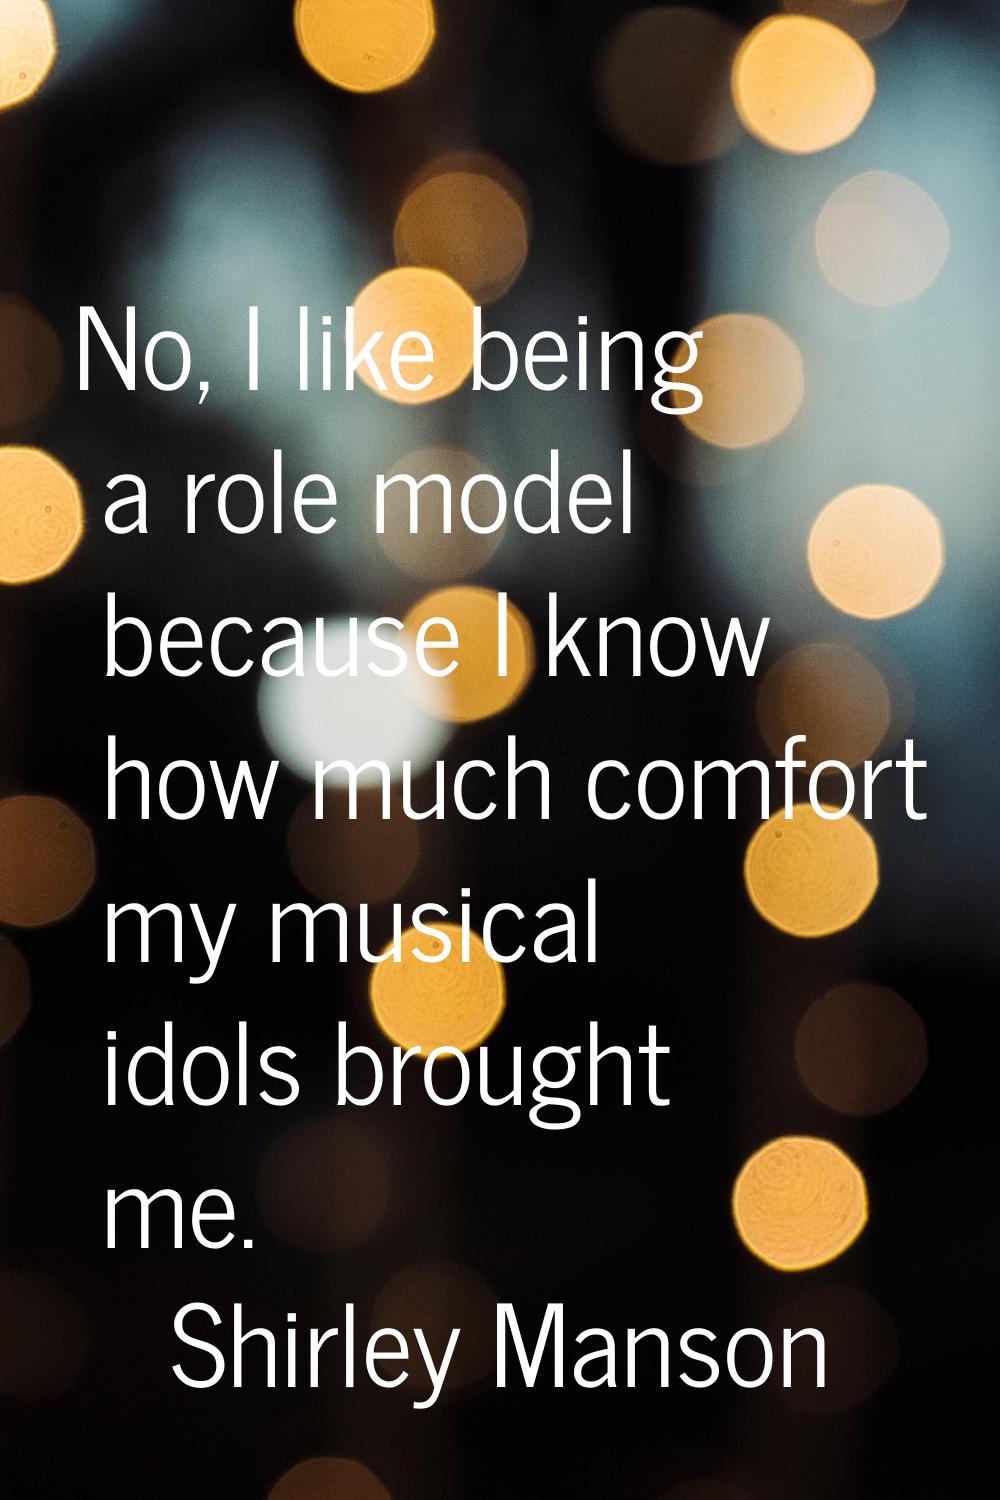 No, I like being a role model because I know how much comfort my musical idols brought me.